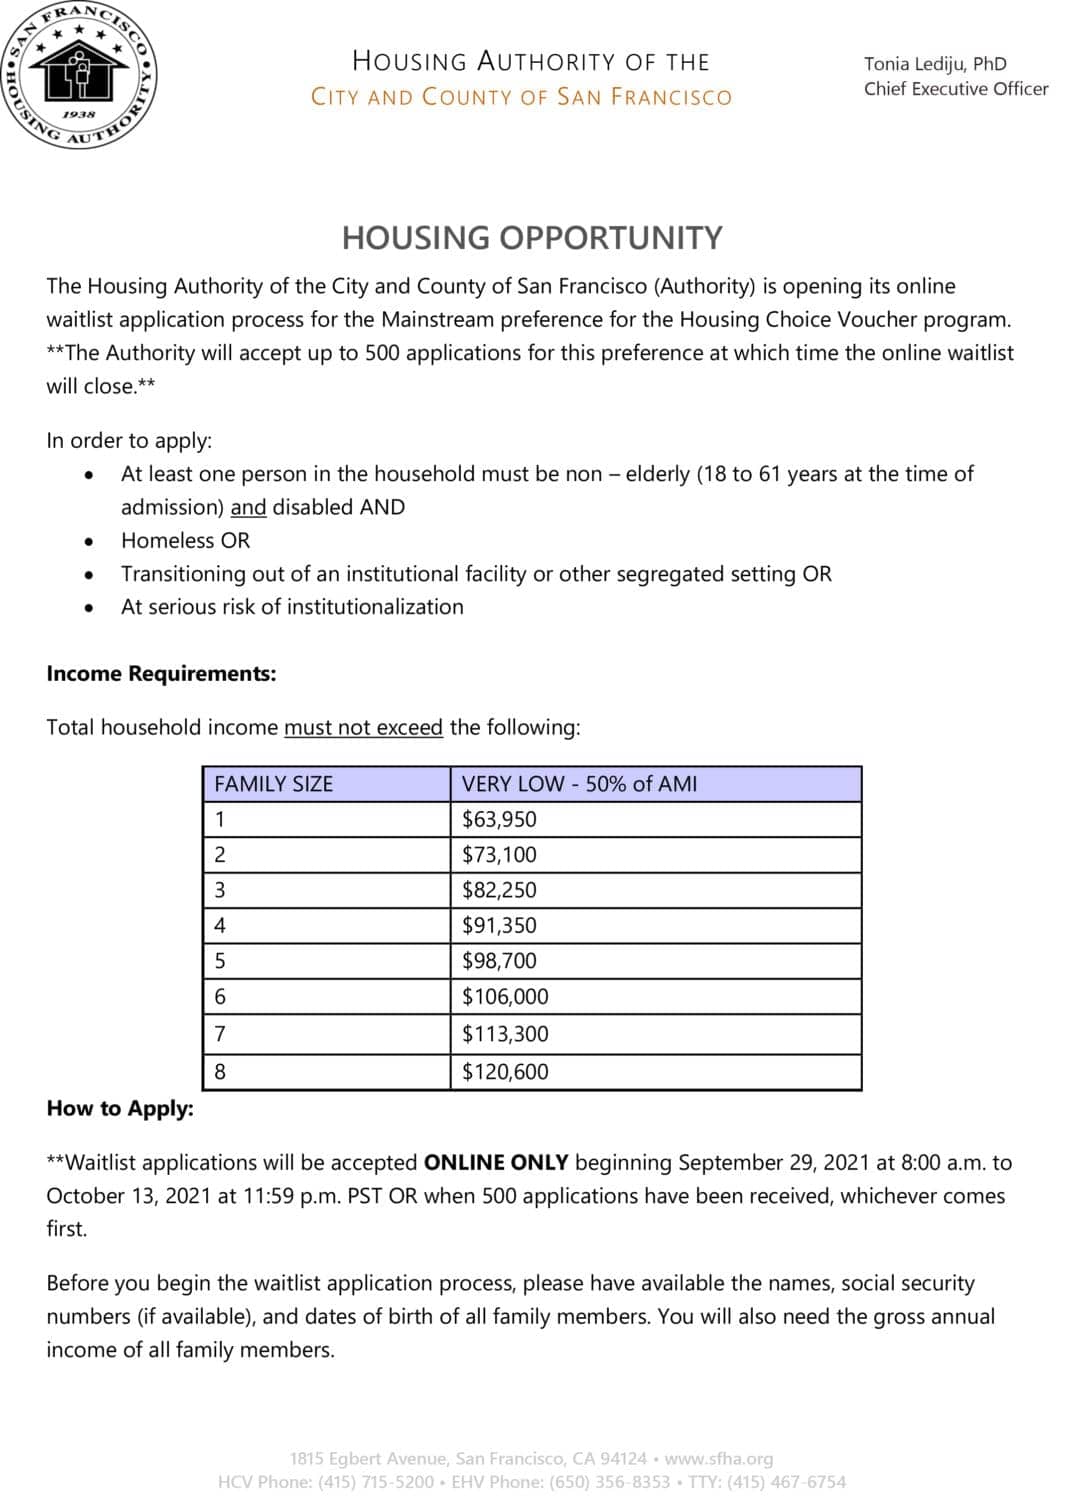 SFHA-0921-1, San Francisco Housing Authority is opening its waitlist application process on 9/29 for Housing Choice Vouchers - 500 available, Affordable Housing 